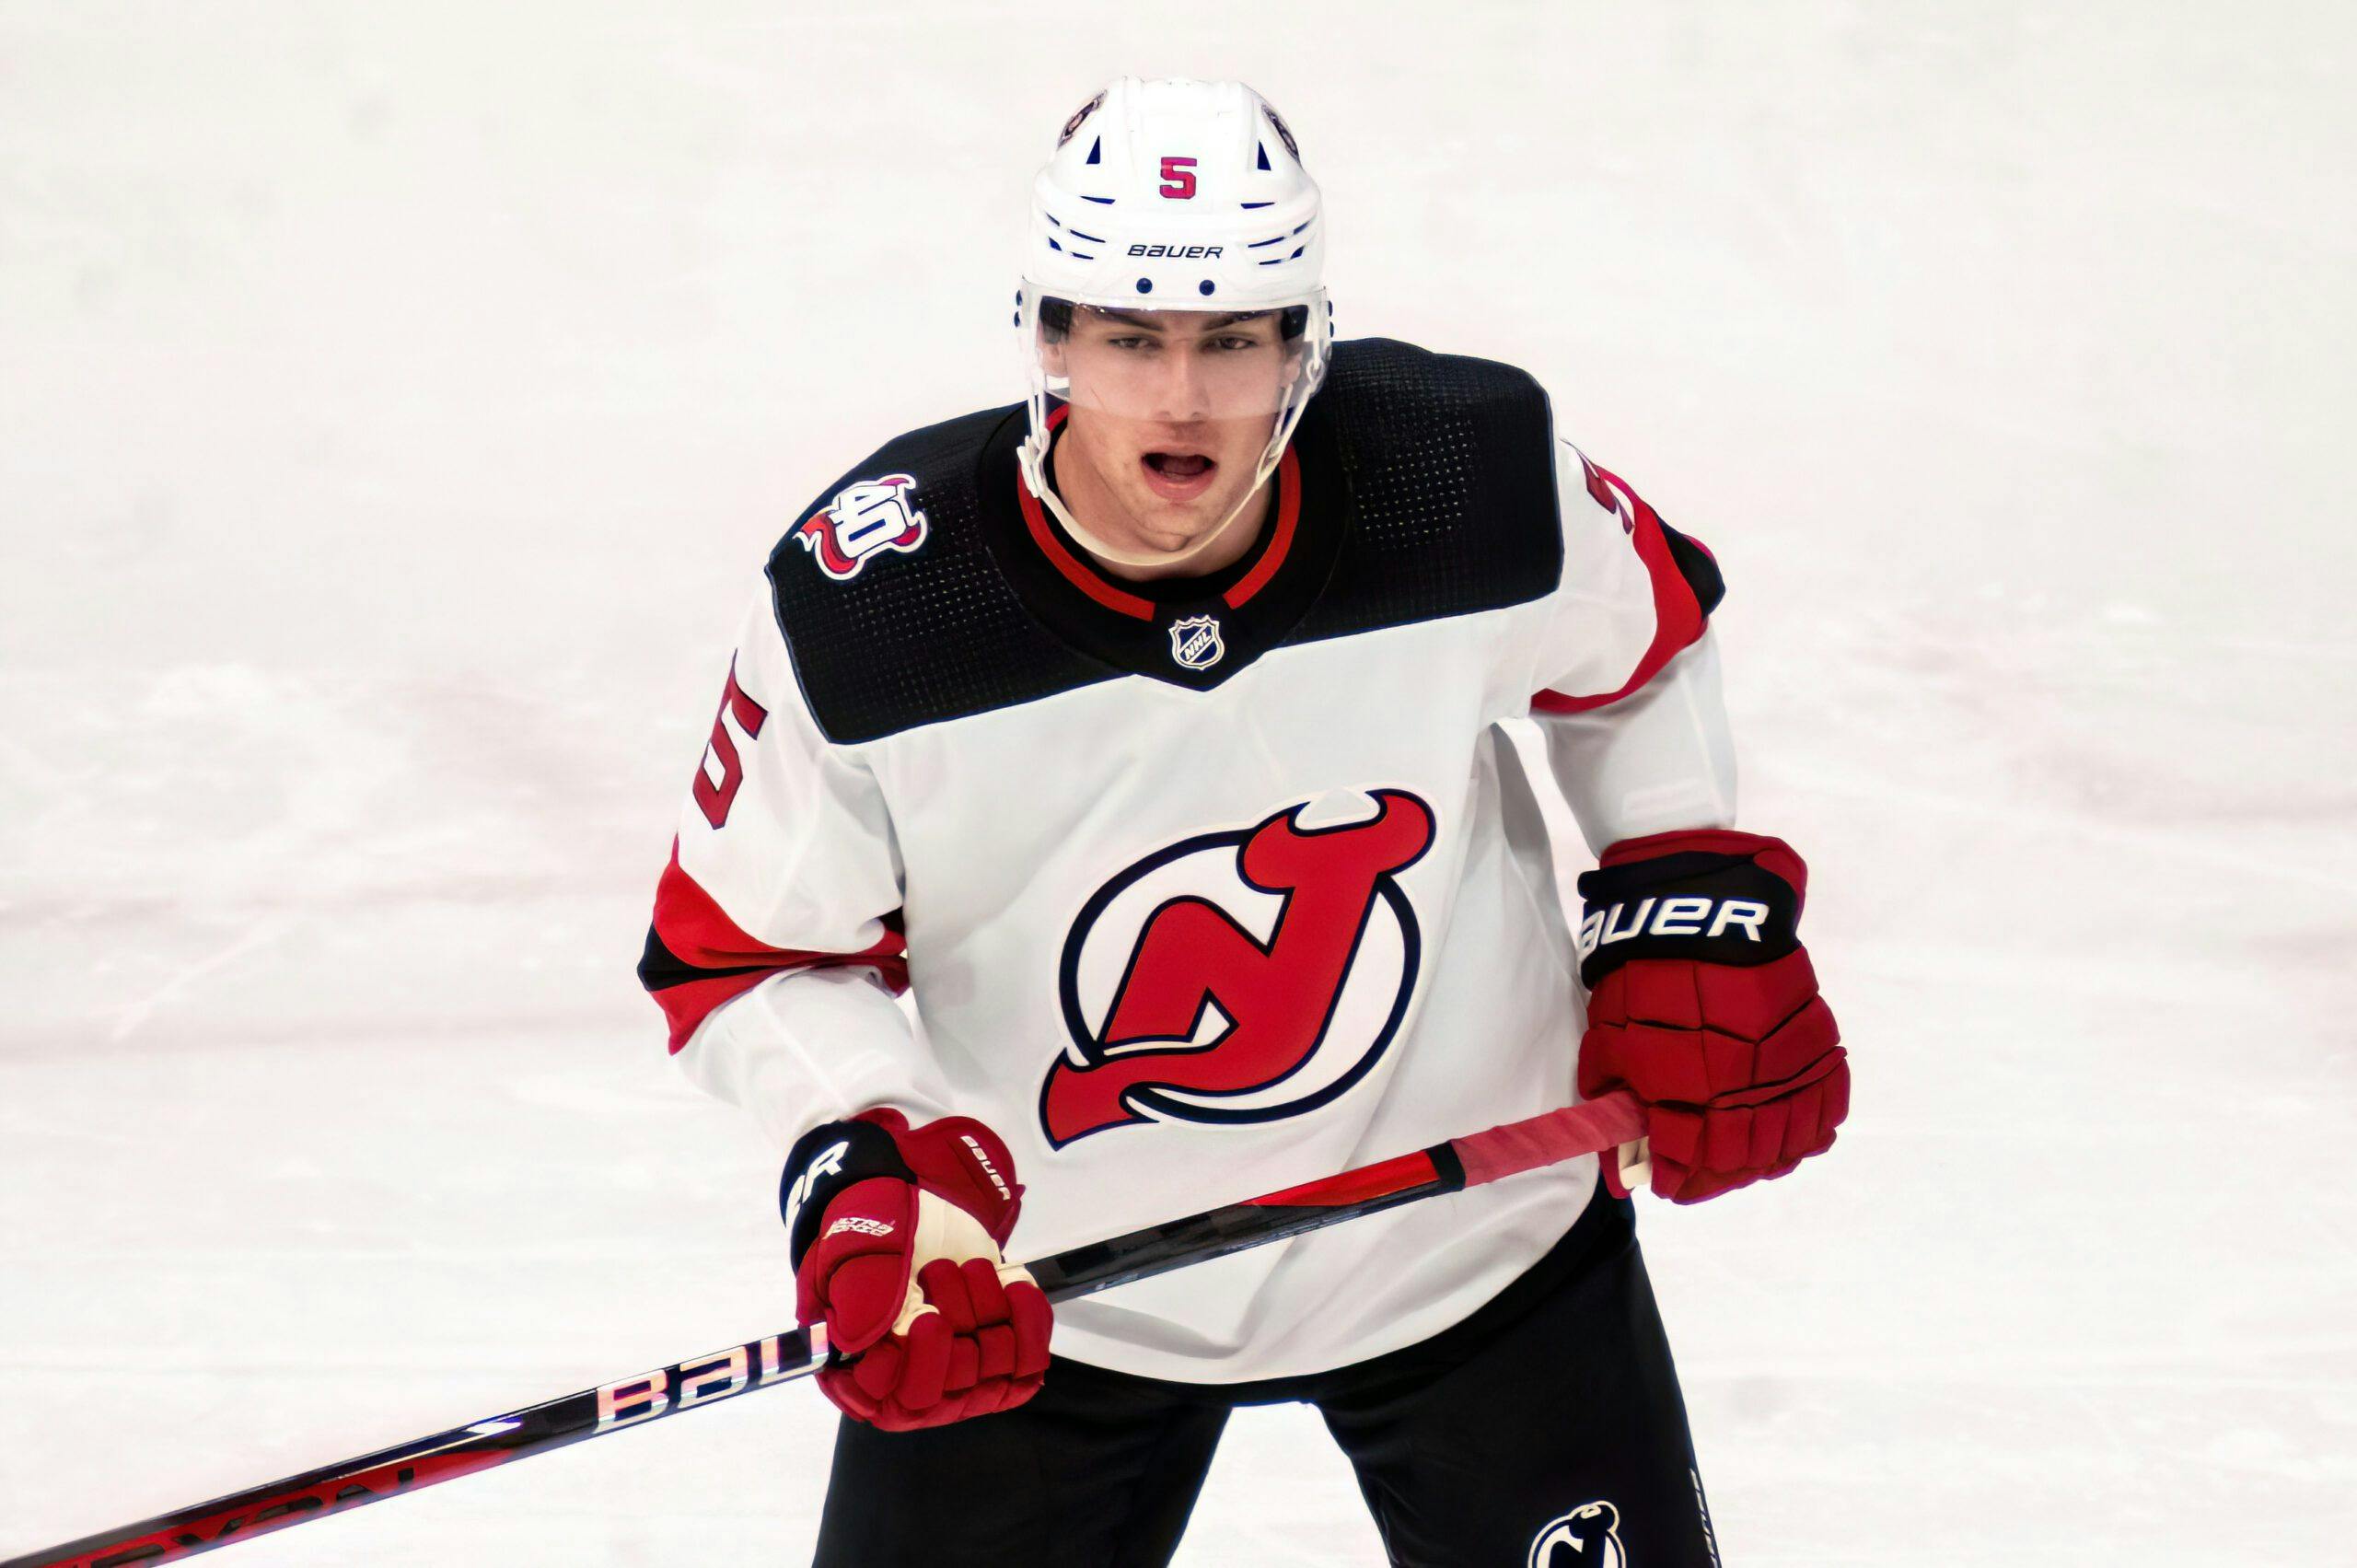 Have the NJ Devils finally learned to close games?